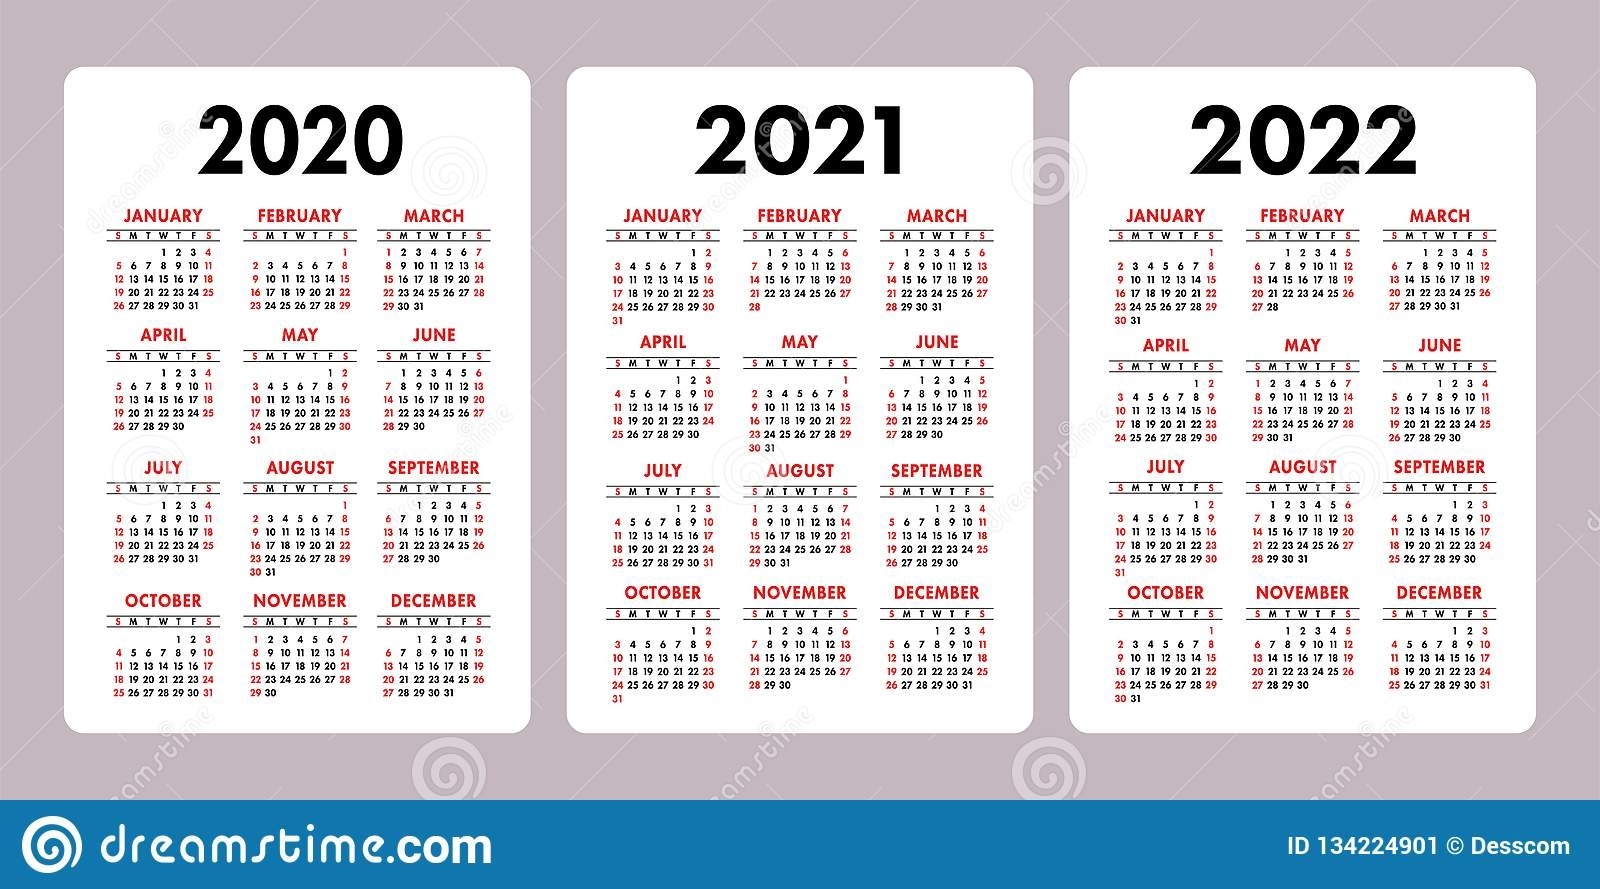 Get Calendars For The Years 2021 2021 & 2022